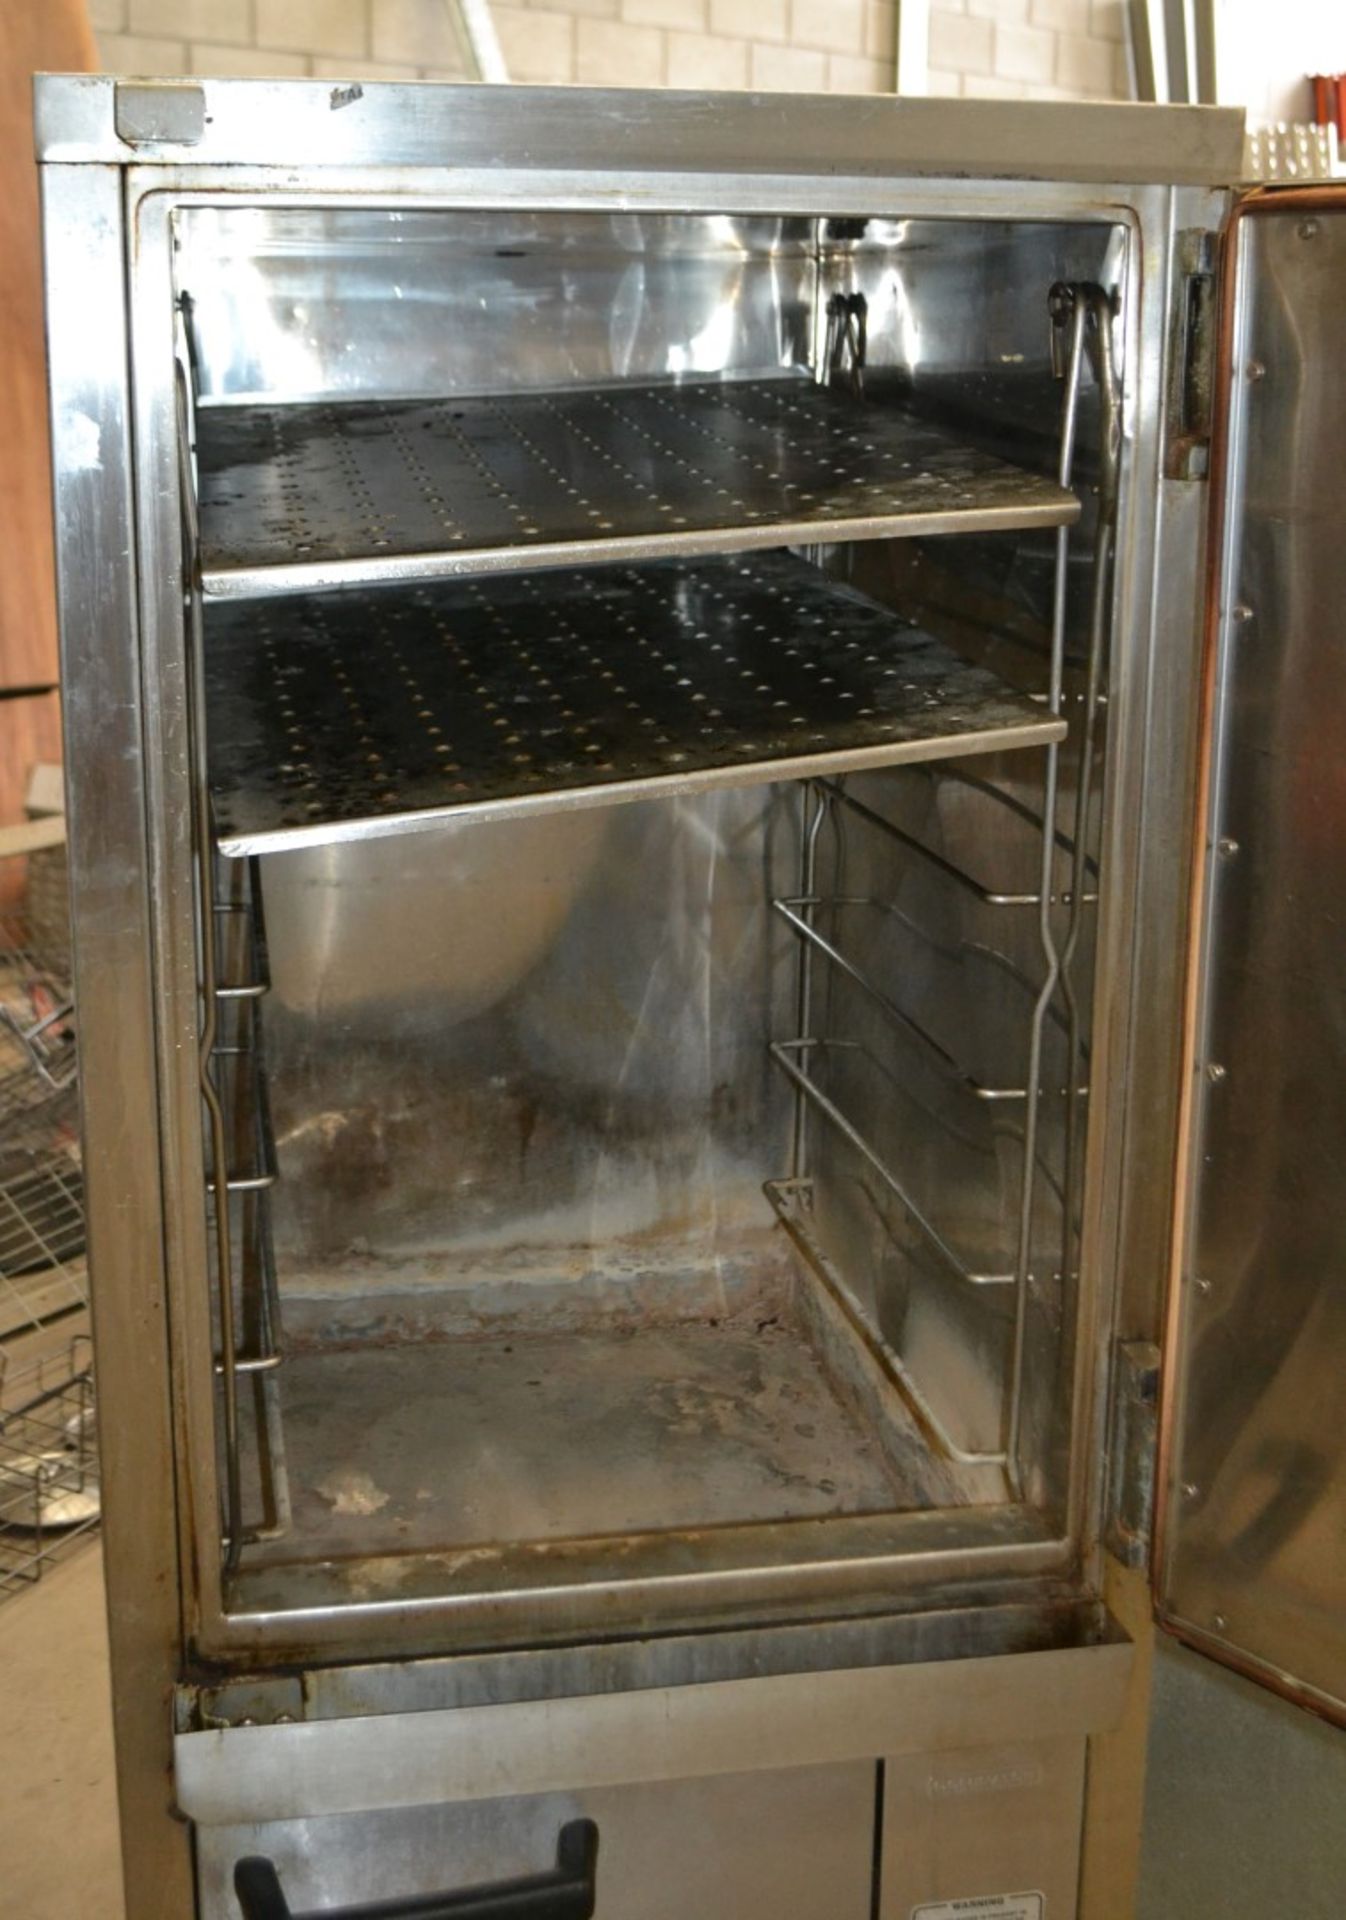 1 x Falcon Commercial Kitchen Steamer Oven - Natural Gas - Model G6478 - CL435 - Location: - Image 4 of 6